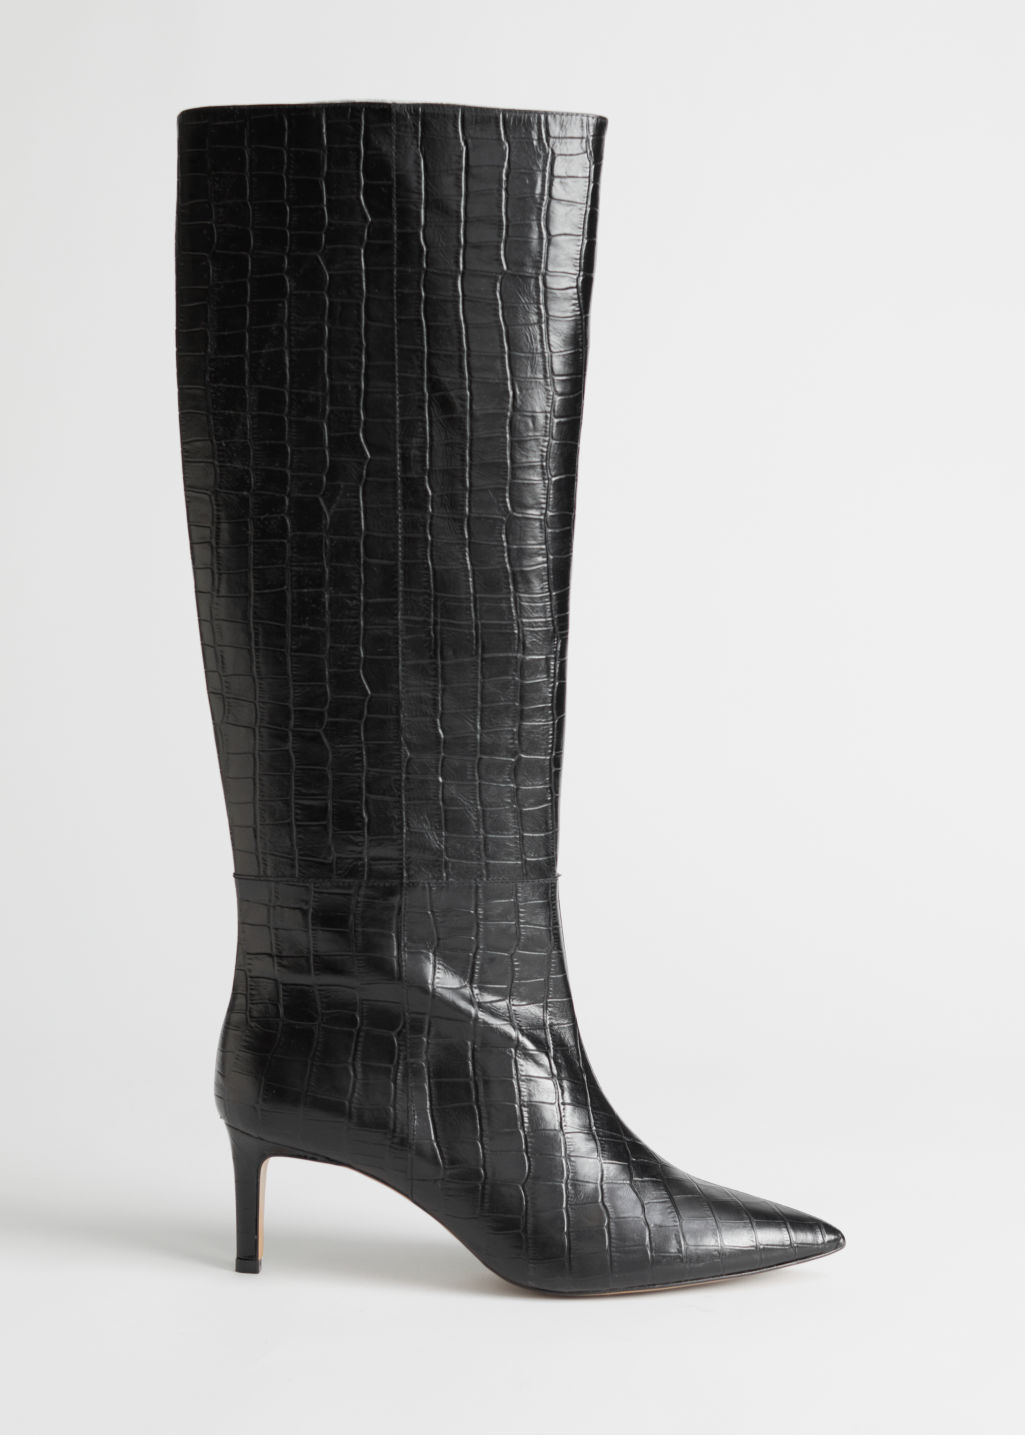 Croc Leather Knee High Boots - Black Croc - Knee high boots - & Other Stories - Click Image to Close